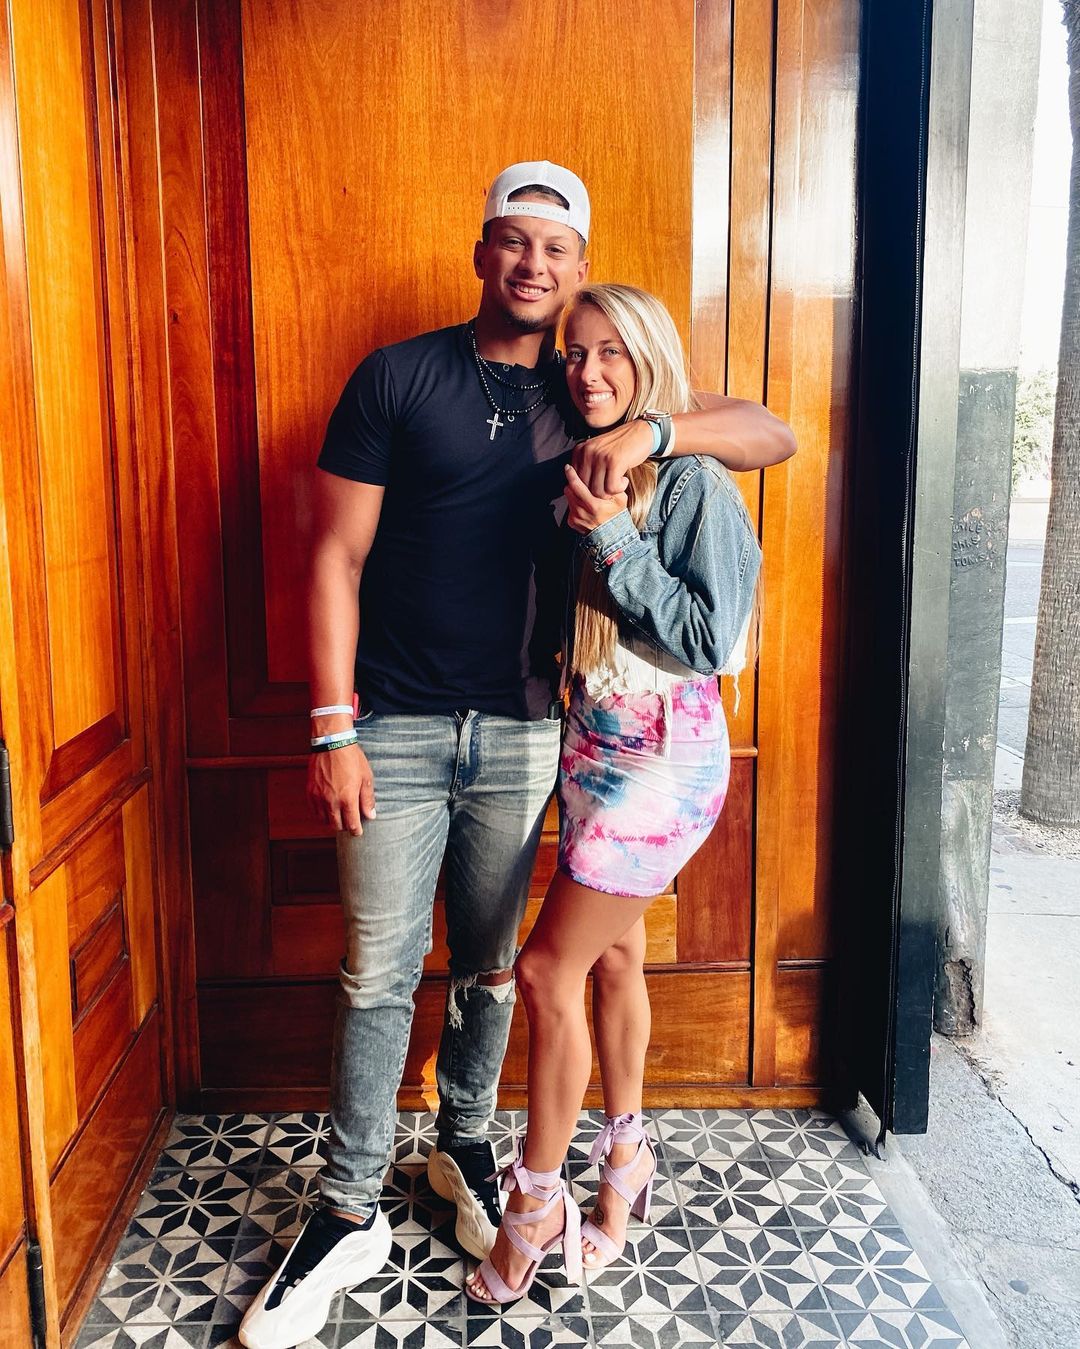 Patrick Mahomes and fiancée Brittany Matthews set wedding date for 2022